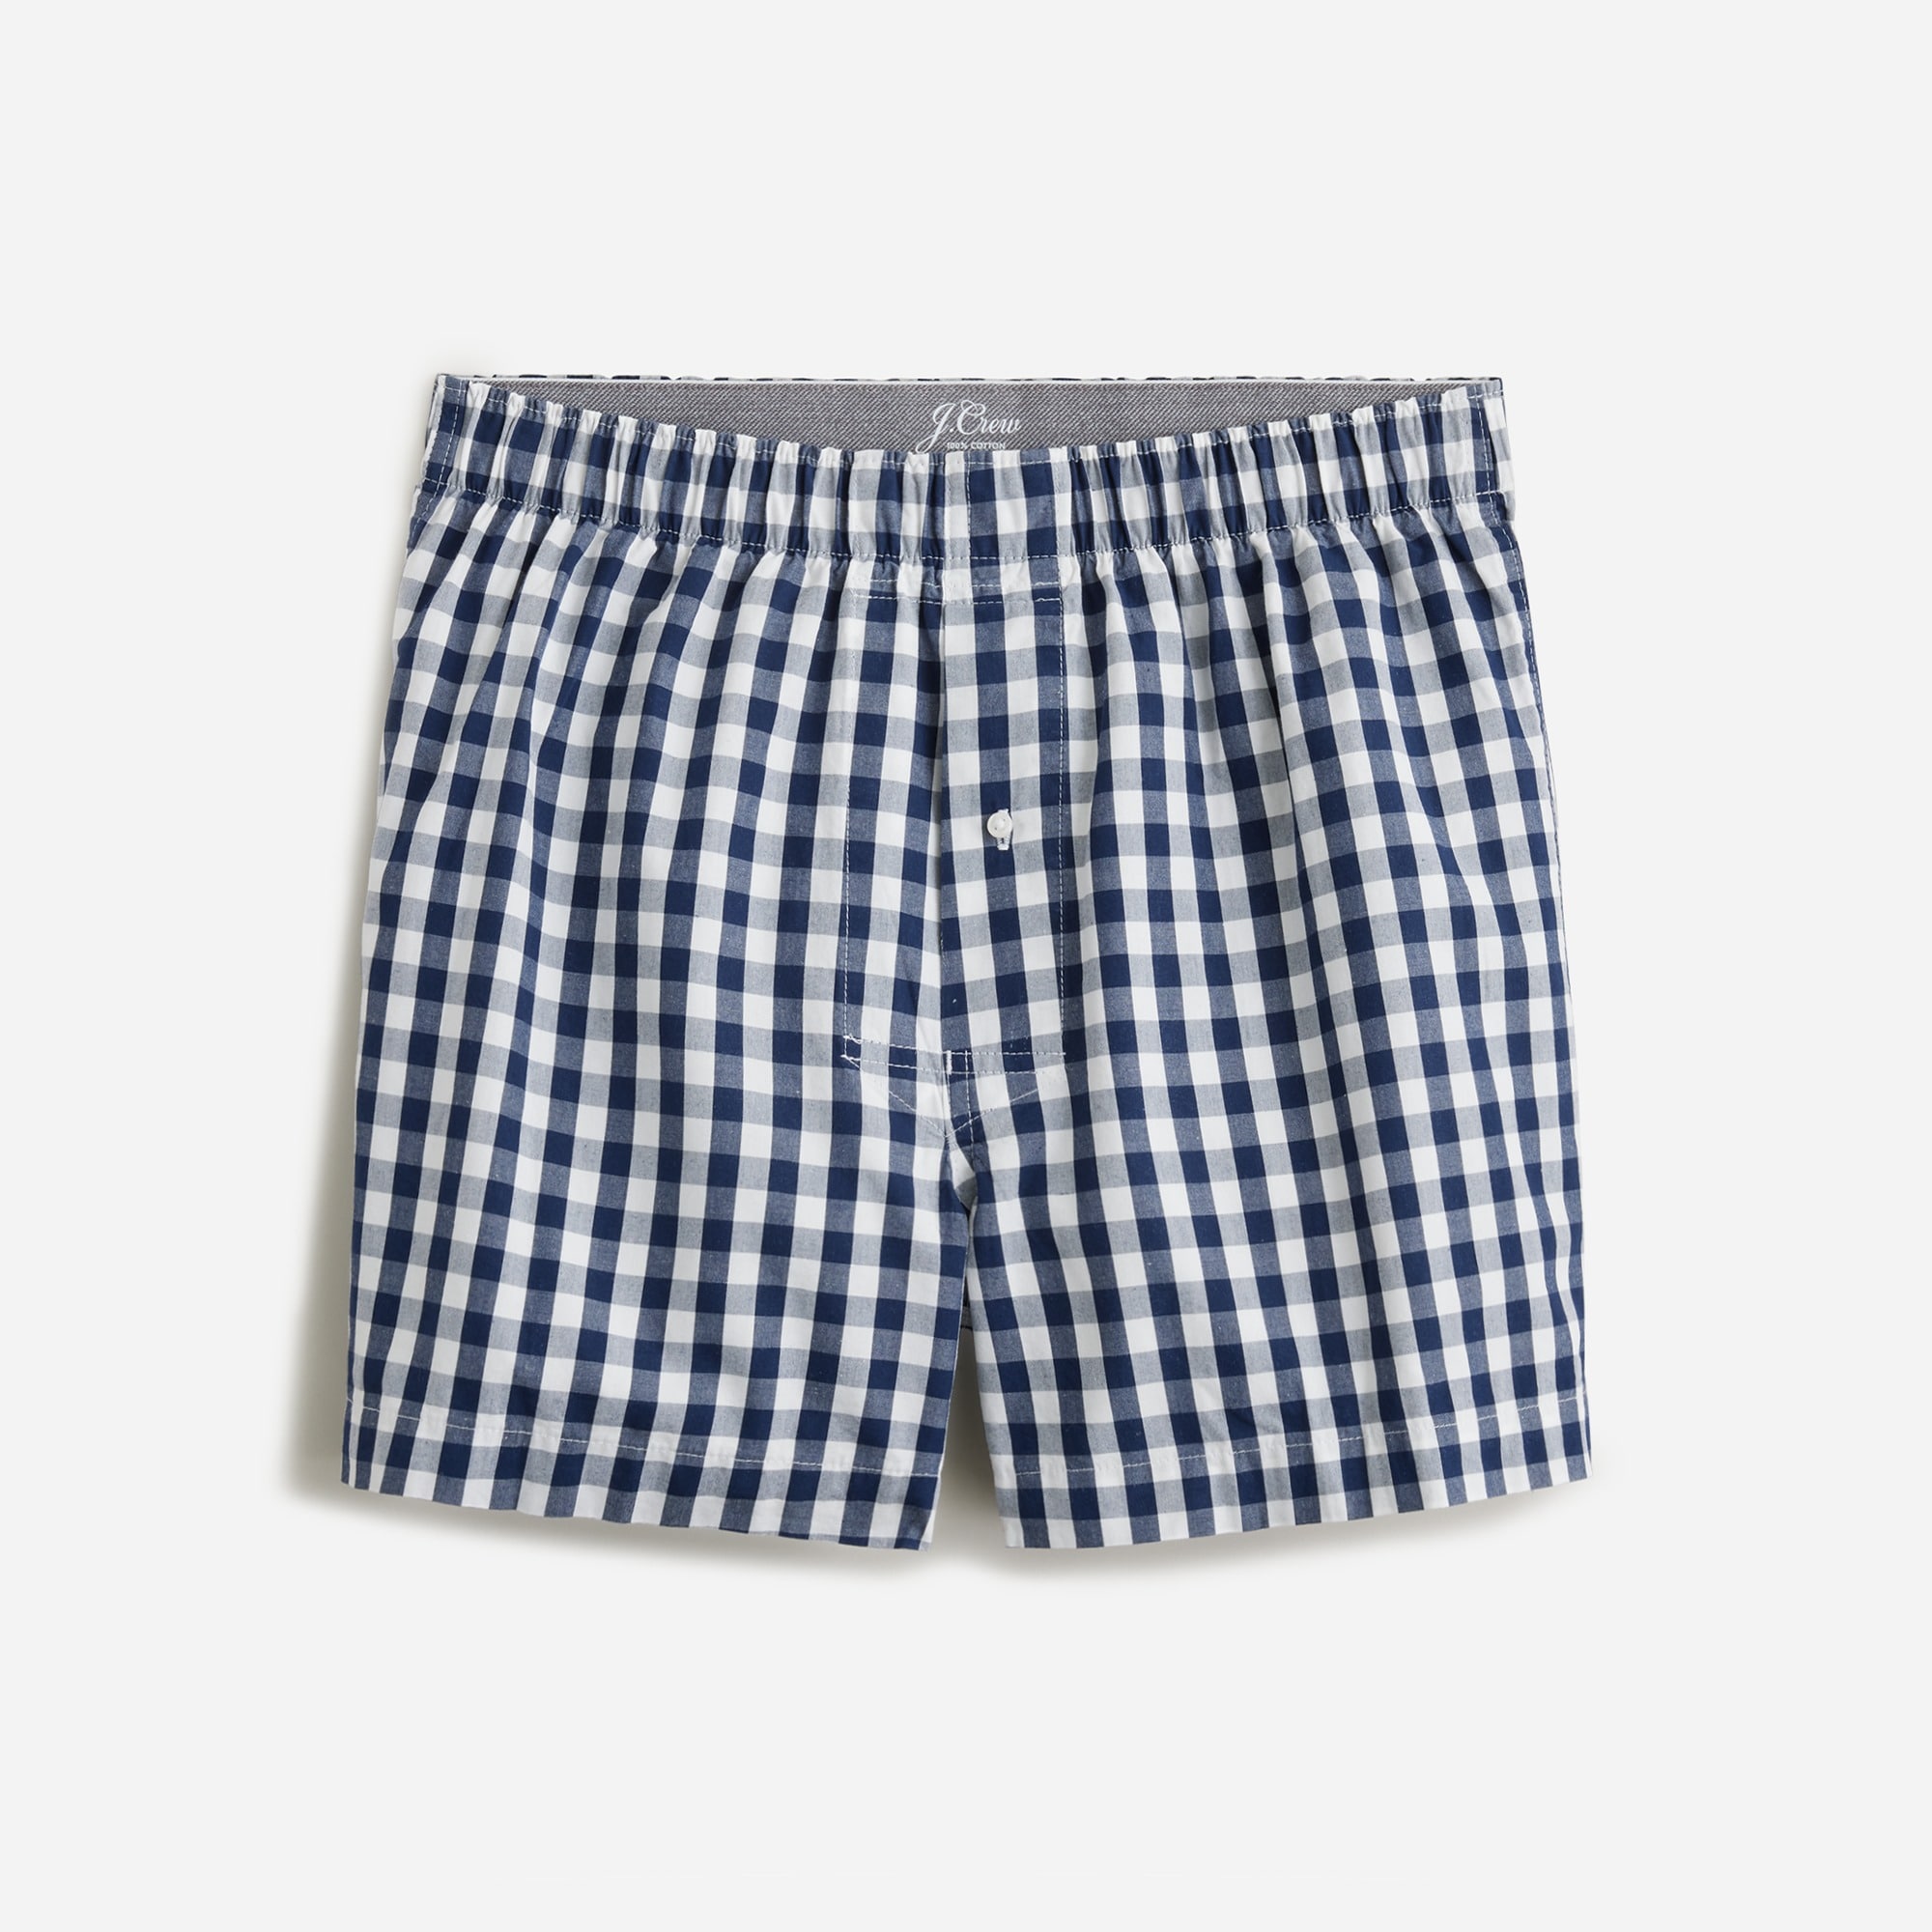 mens Patterned boxers